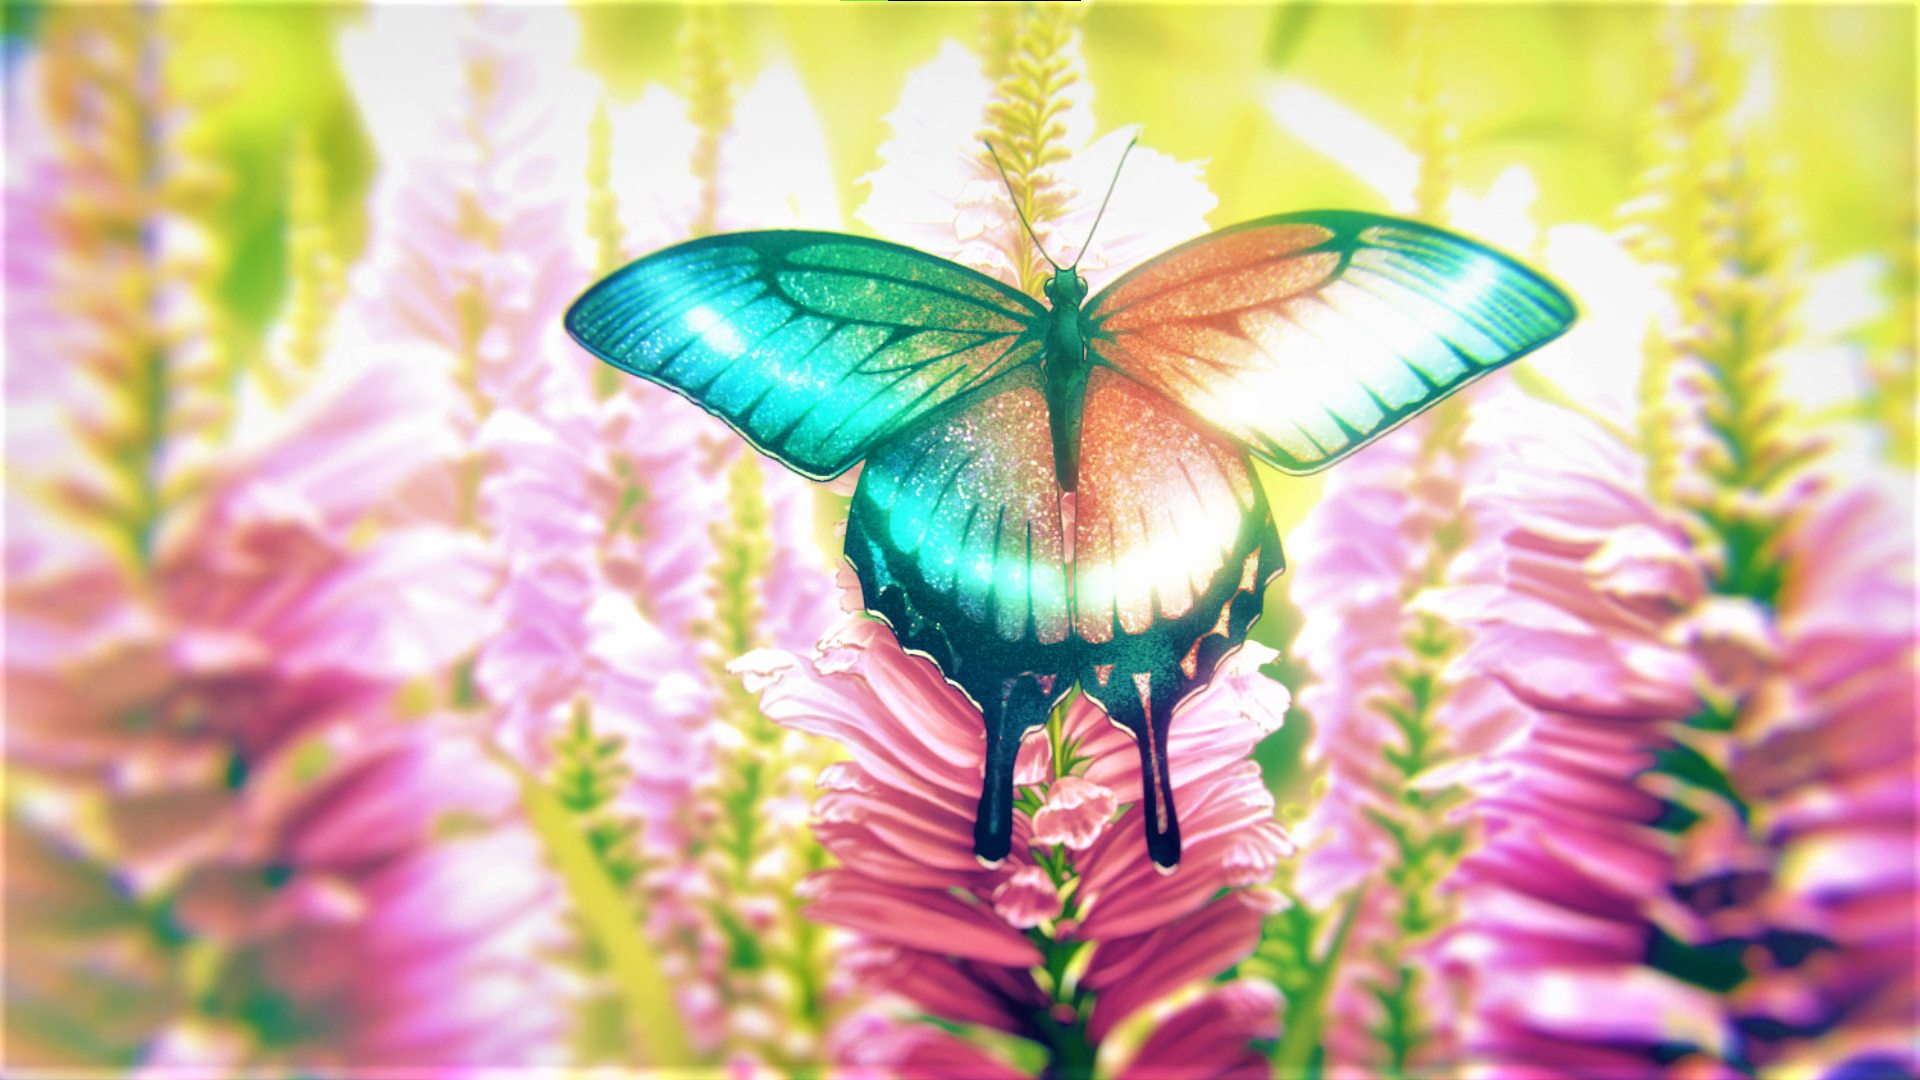 Anime 1920x1080 Jujutsu Kaisen butterfly flowers sunlight anime Anime screenshot insect colorful